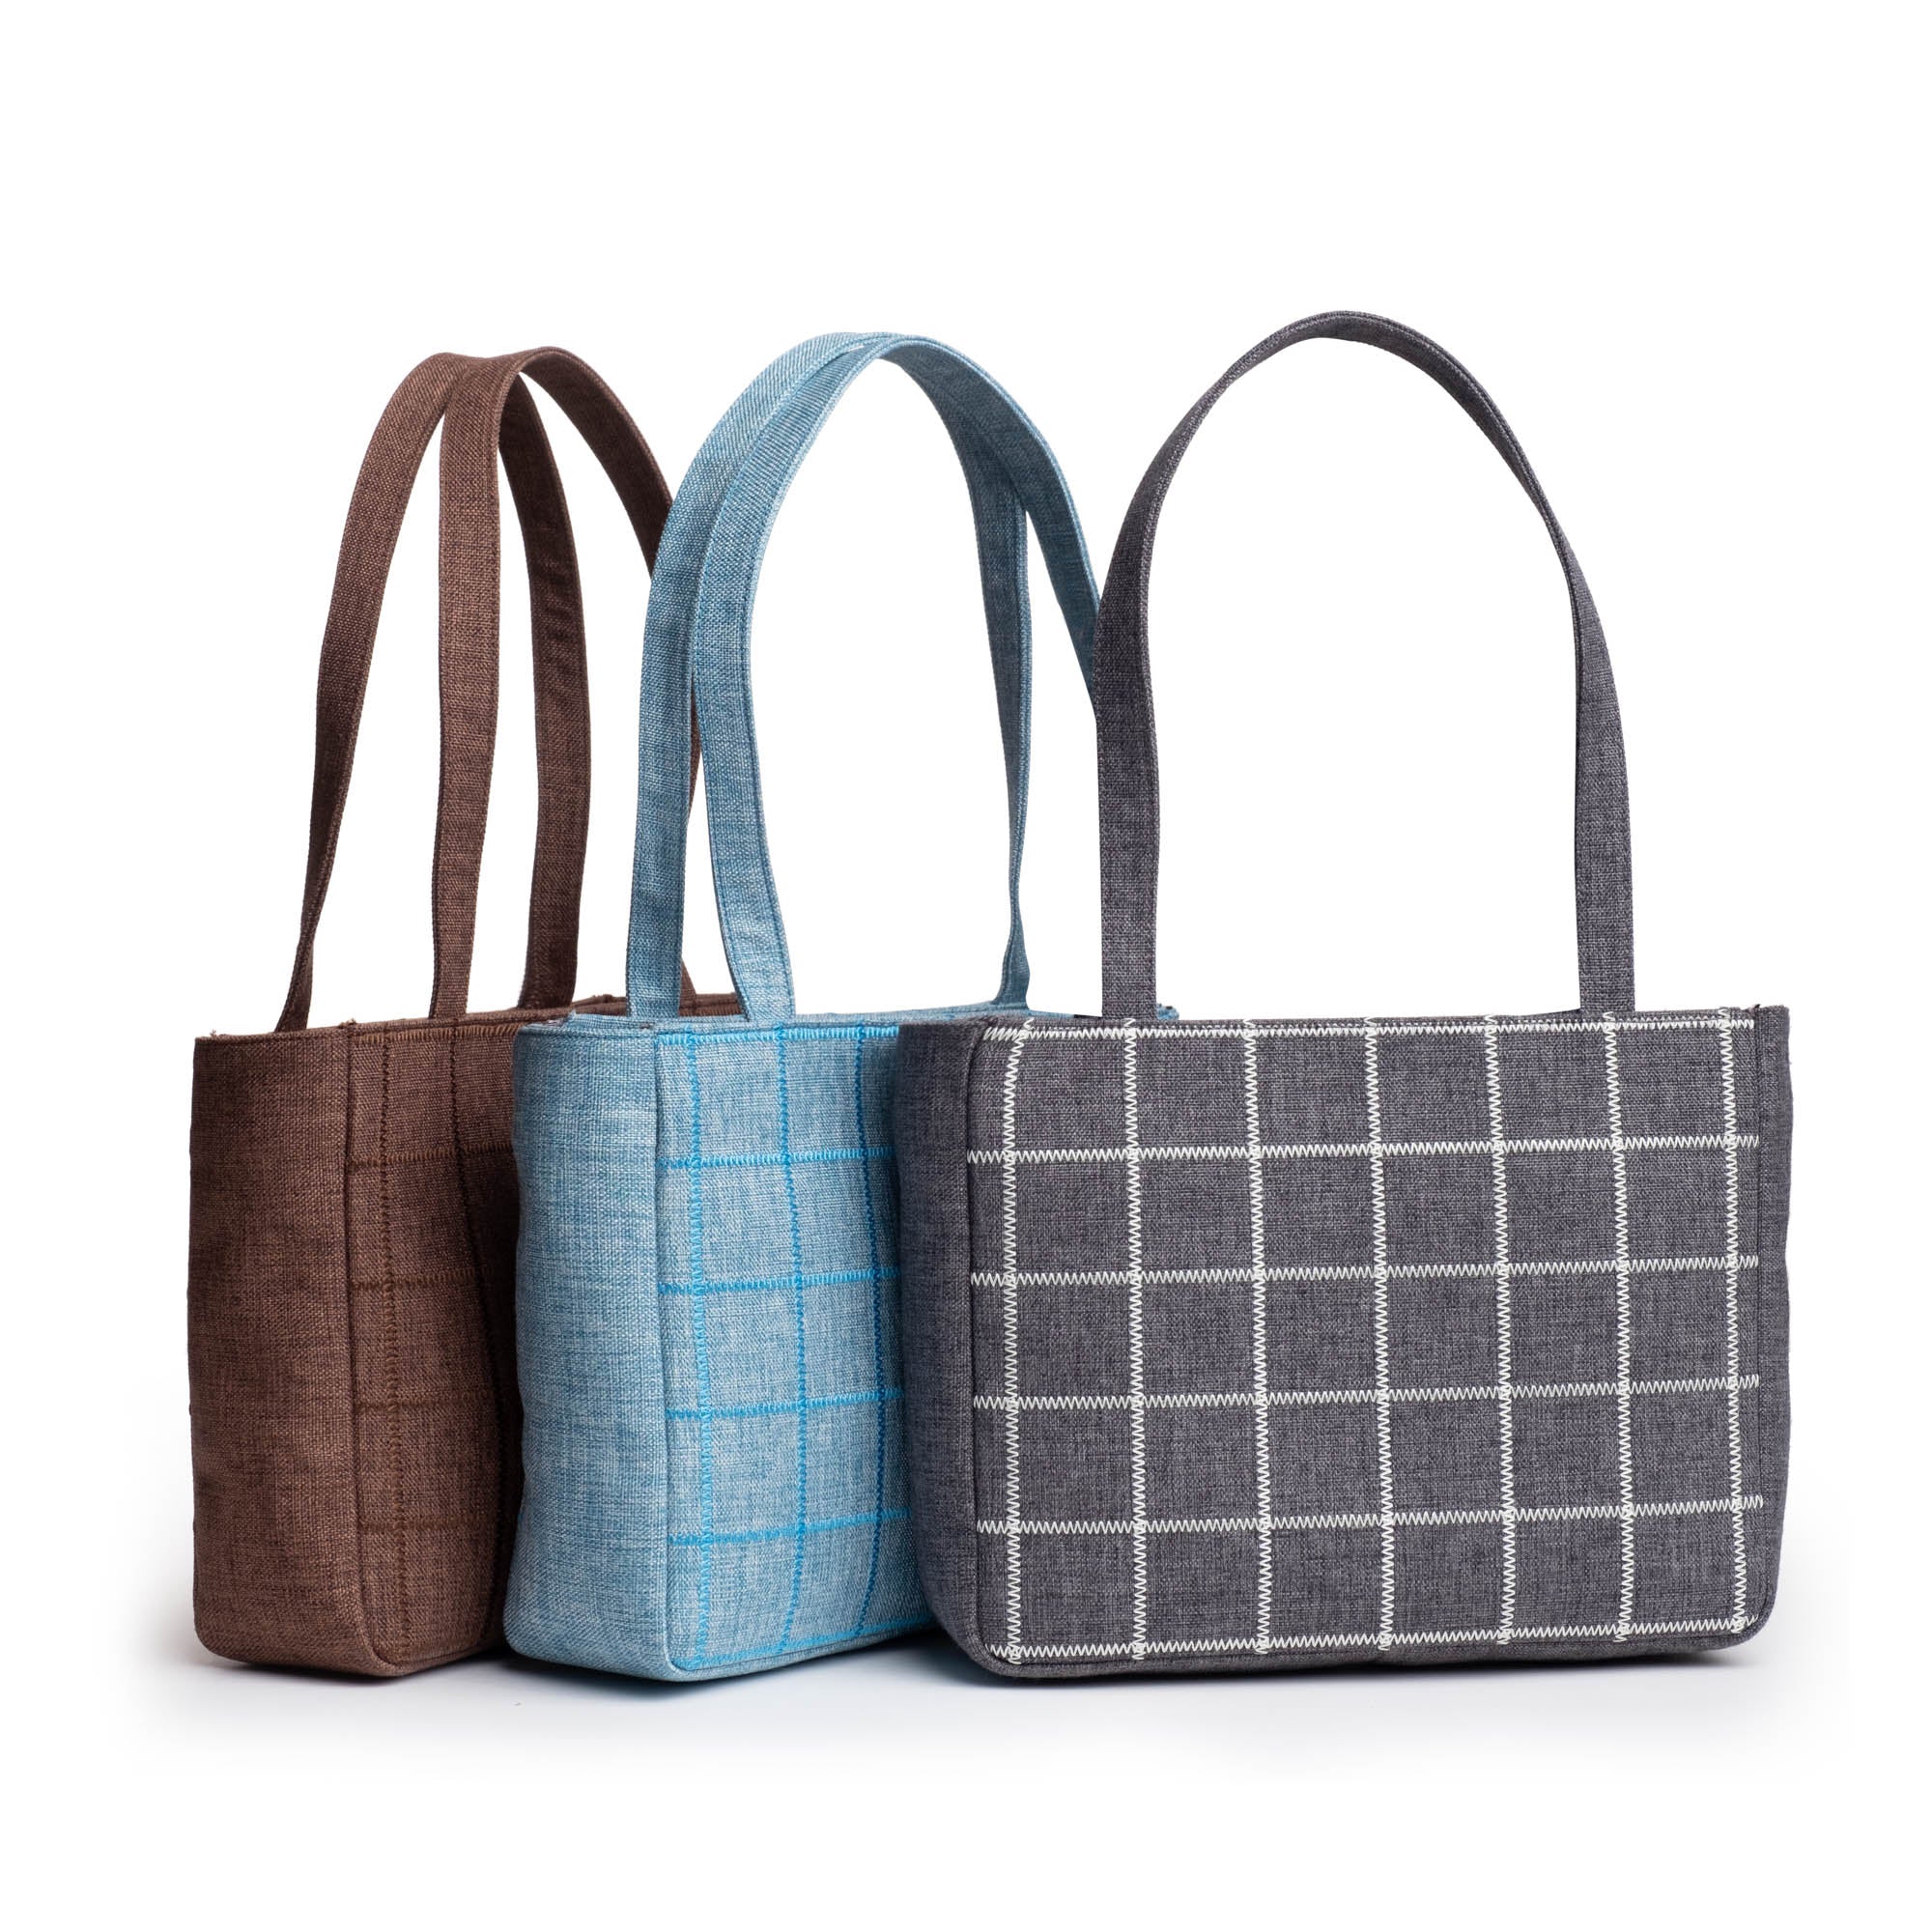 style friendly totes for women